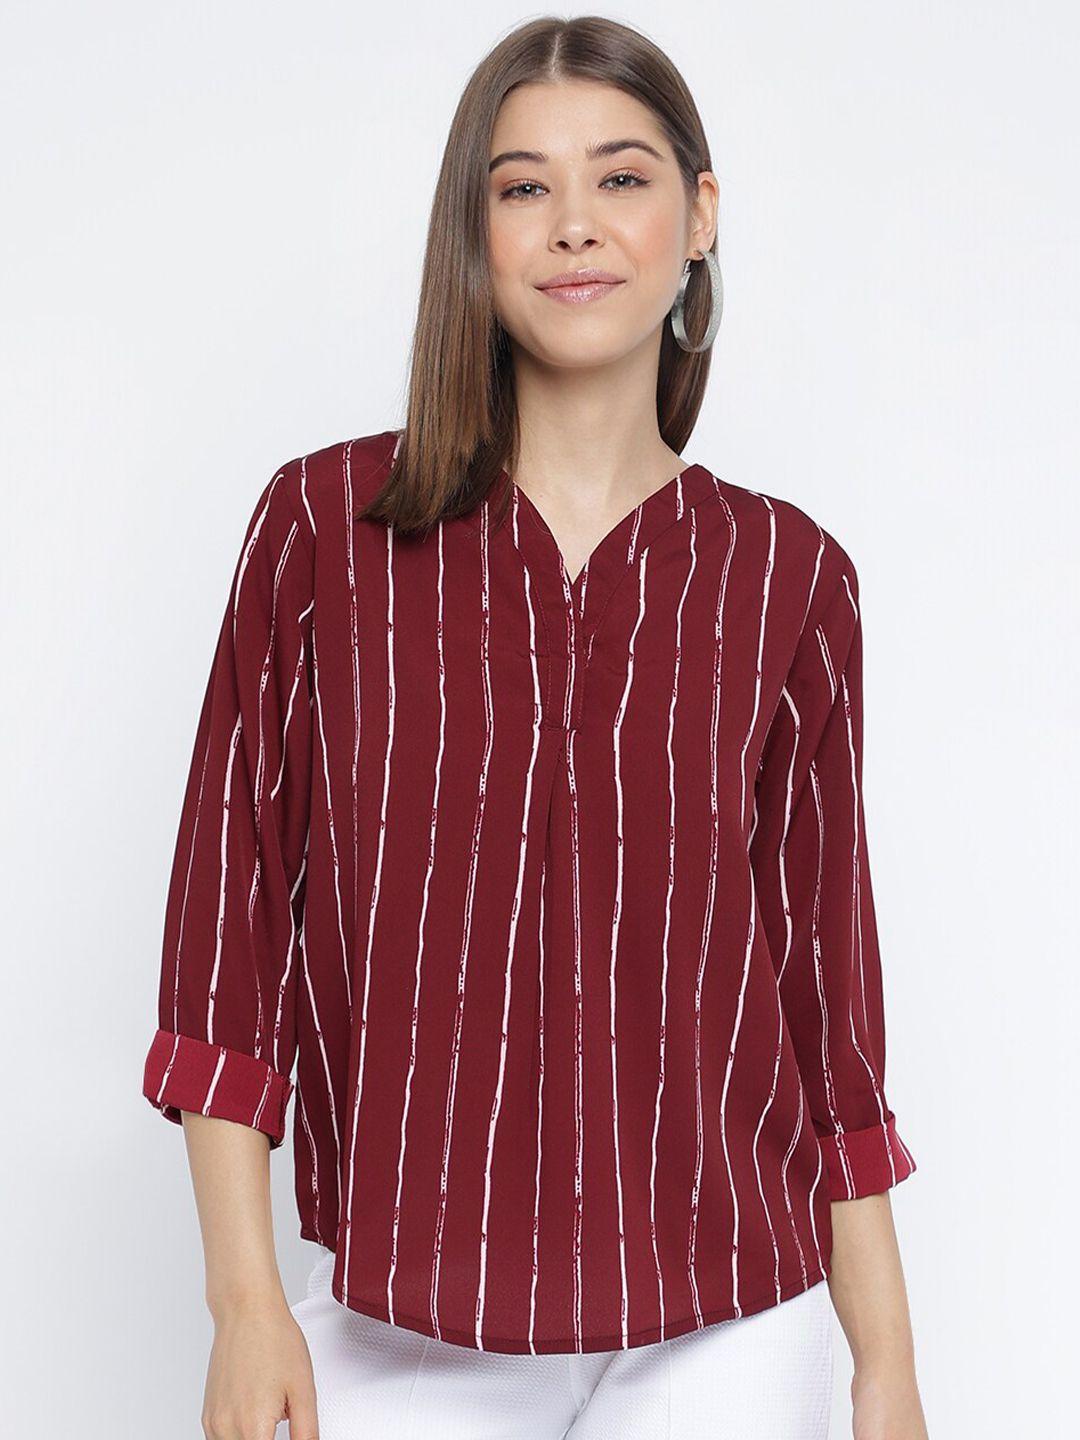 mayra striped v-neck roll -up sleeves top